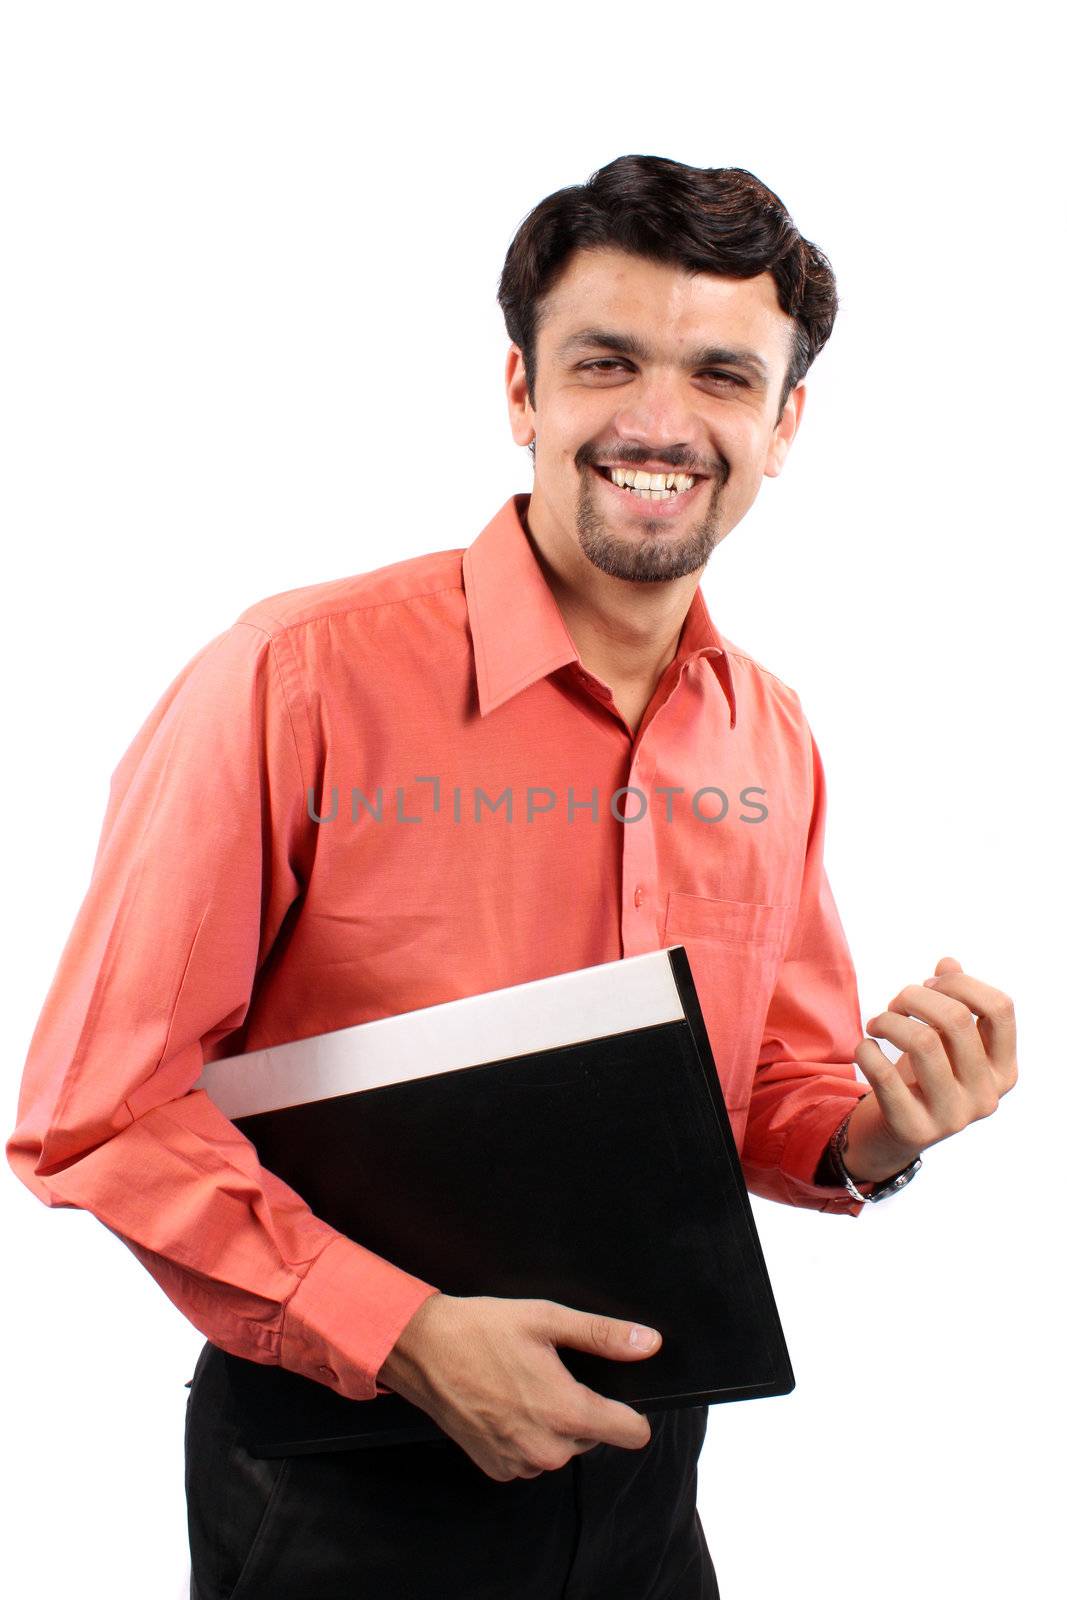 A young Indian executive expressing his success / happiness after getting a job, isolated on white studdio background.